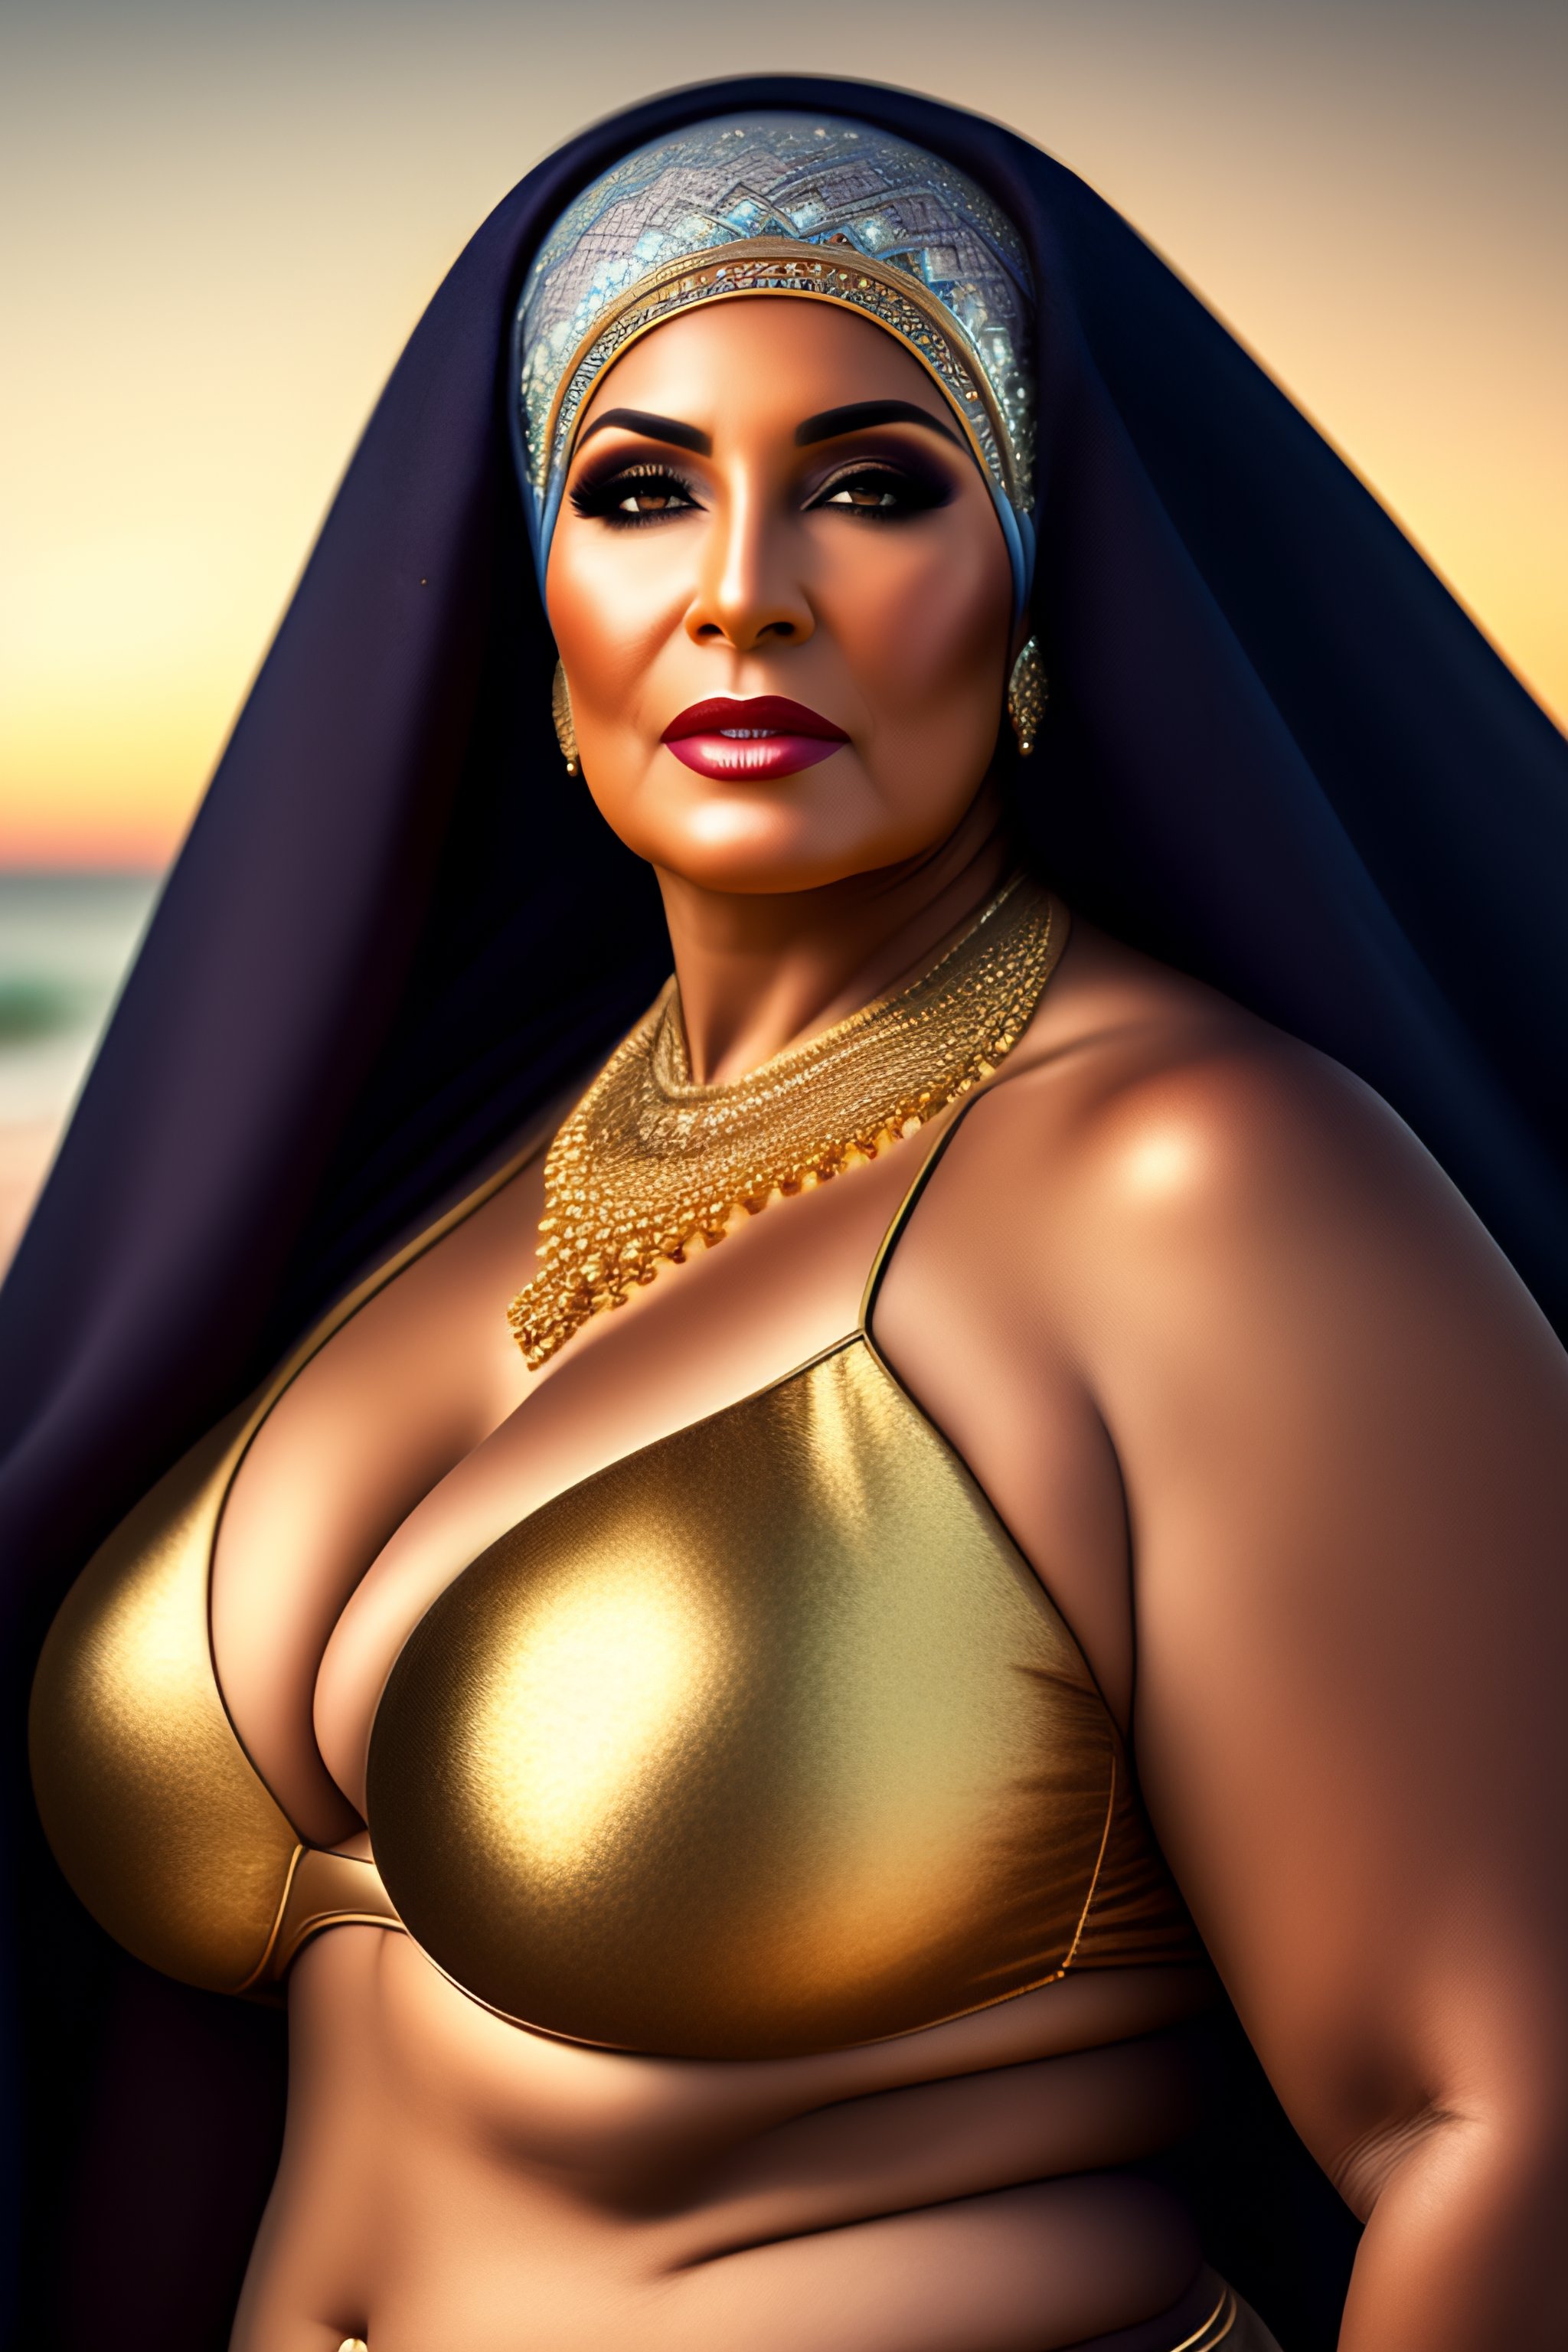 Lexica - Arabic woman 60 years old granny . bikini . high quality . plus  sized model . larger tiddie chest size . mighty plump. gold jewelry .  diamo...